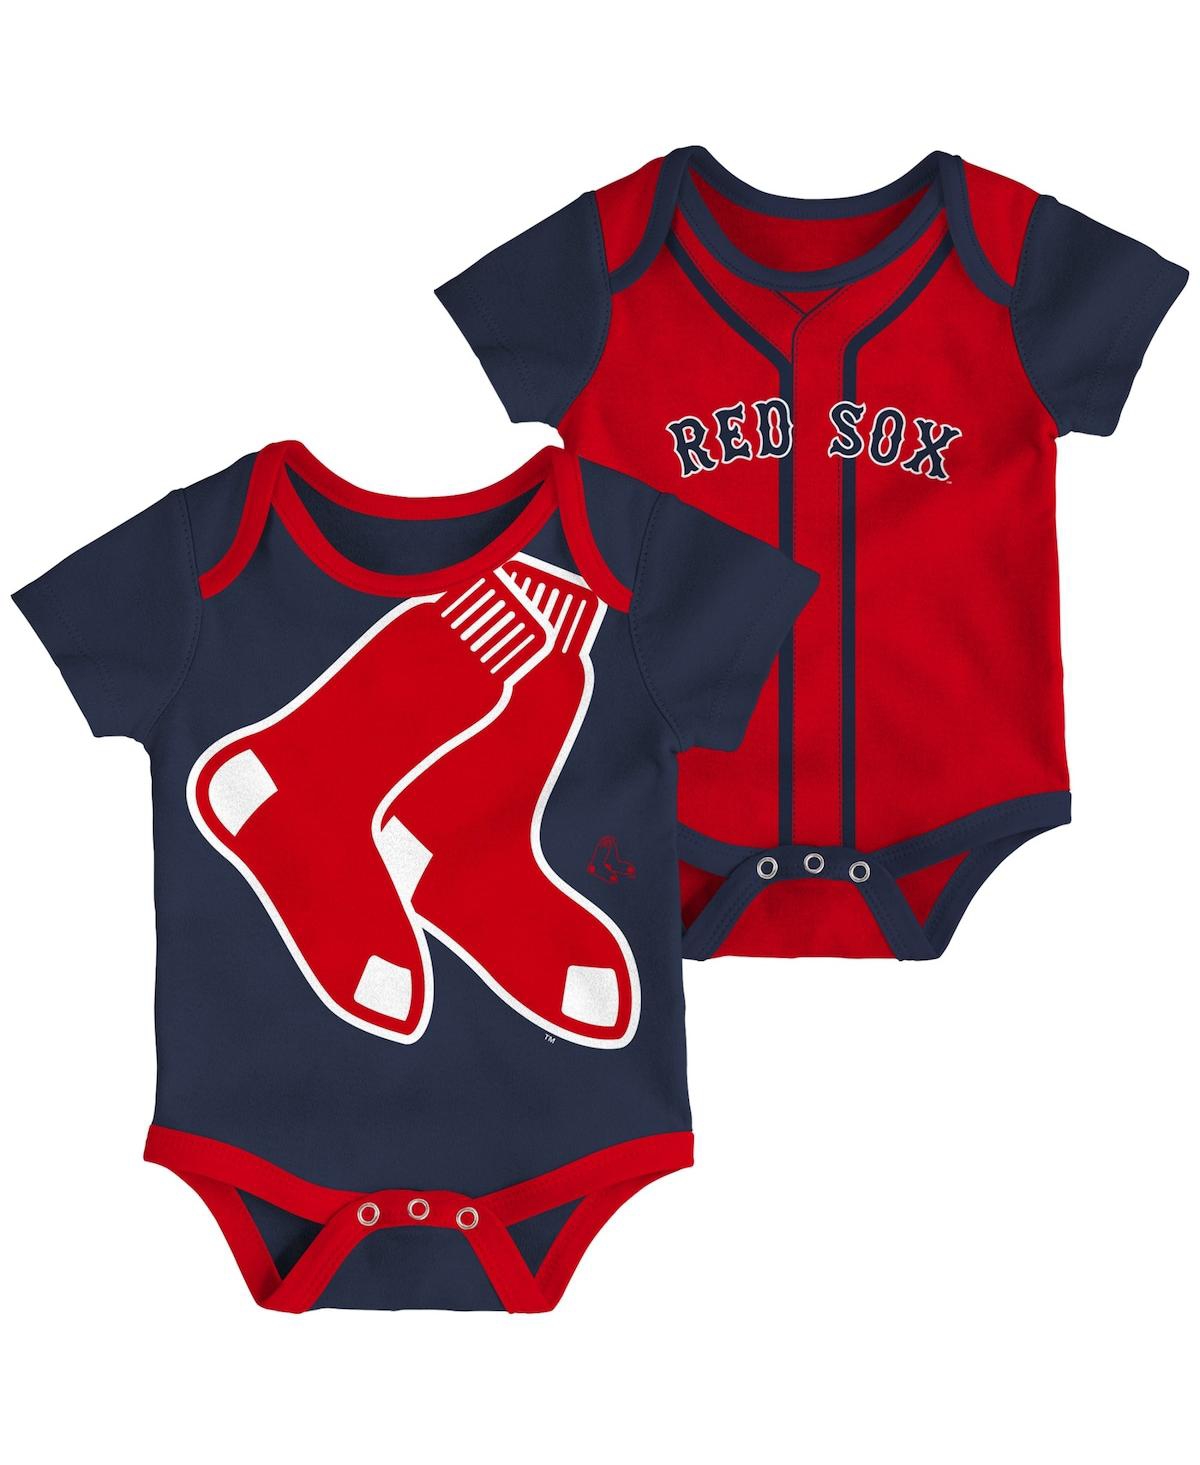 Outerstuff Babies' Infant Boys And Girls Navy, Red Boston Red Sox Double 2-pack Bodysuit Set In Navy,red